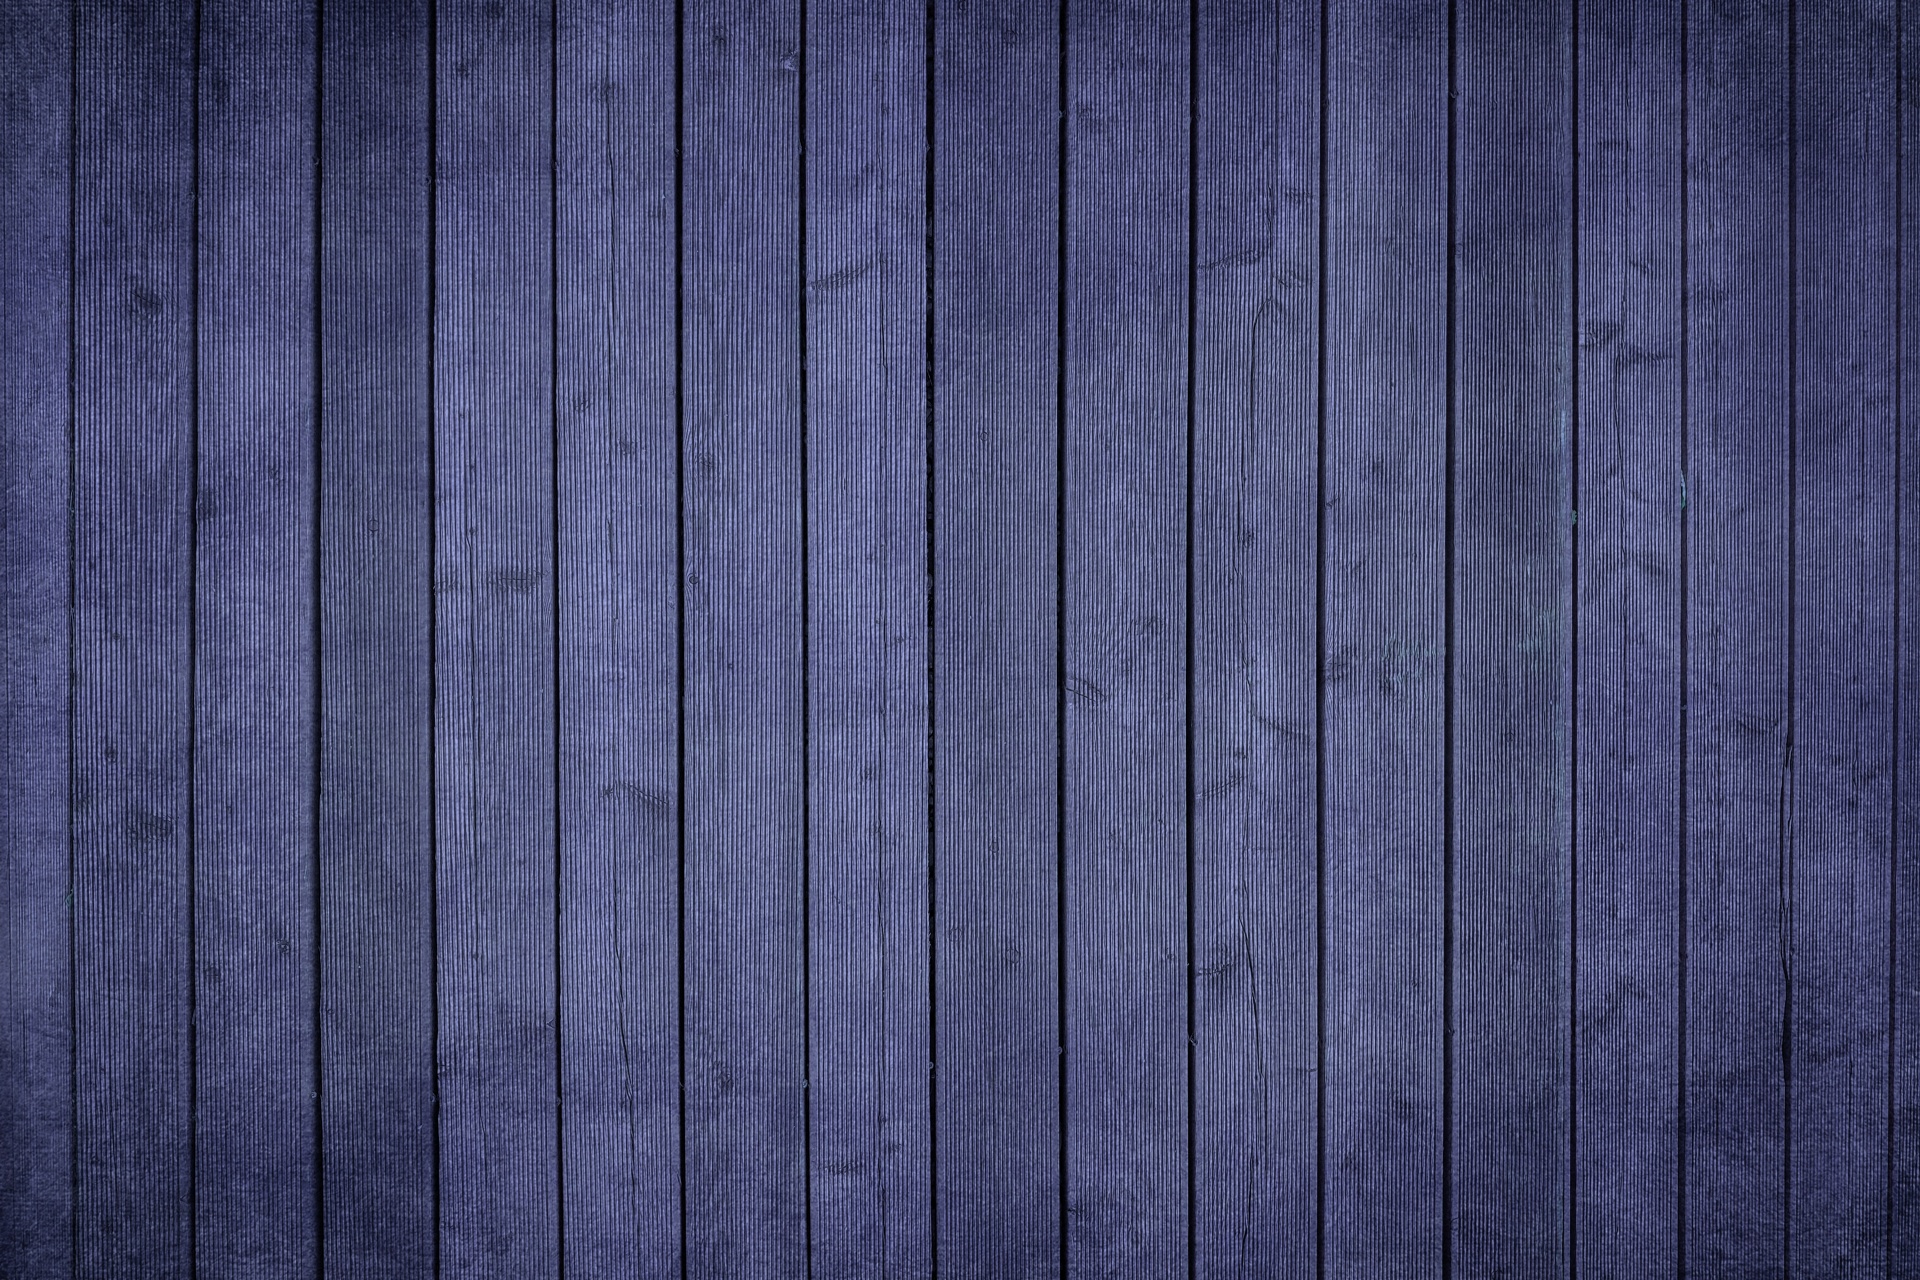 Wood boards wall background colored monochrome